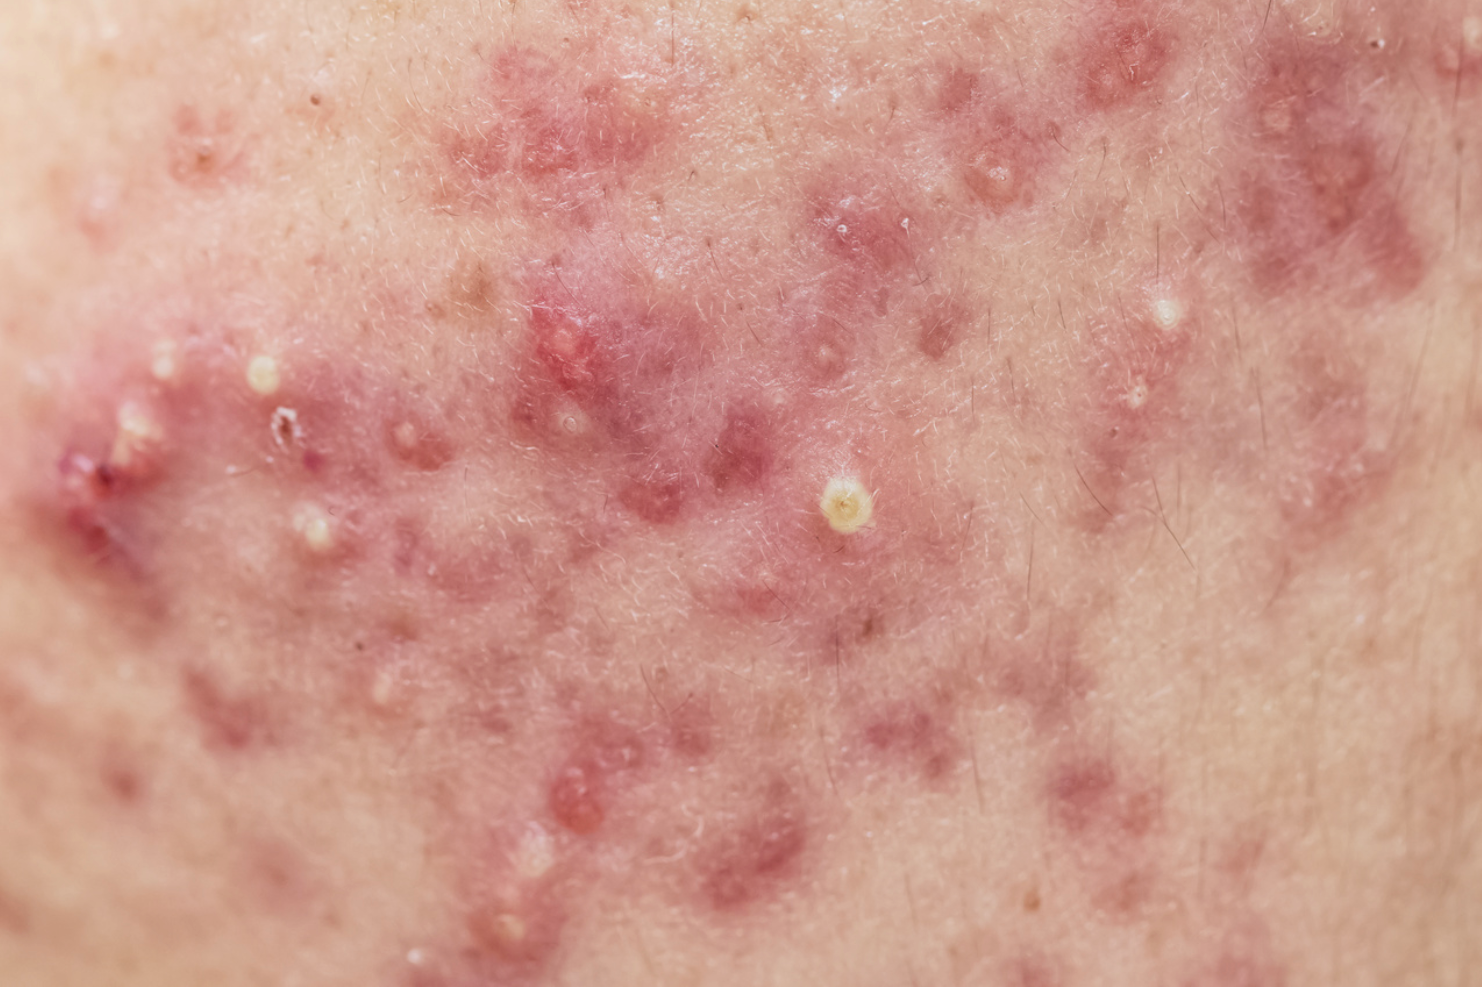 Clinical Overview: Isotretinoin (Absorica) for Severe Recalcitrant Nodular Acne